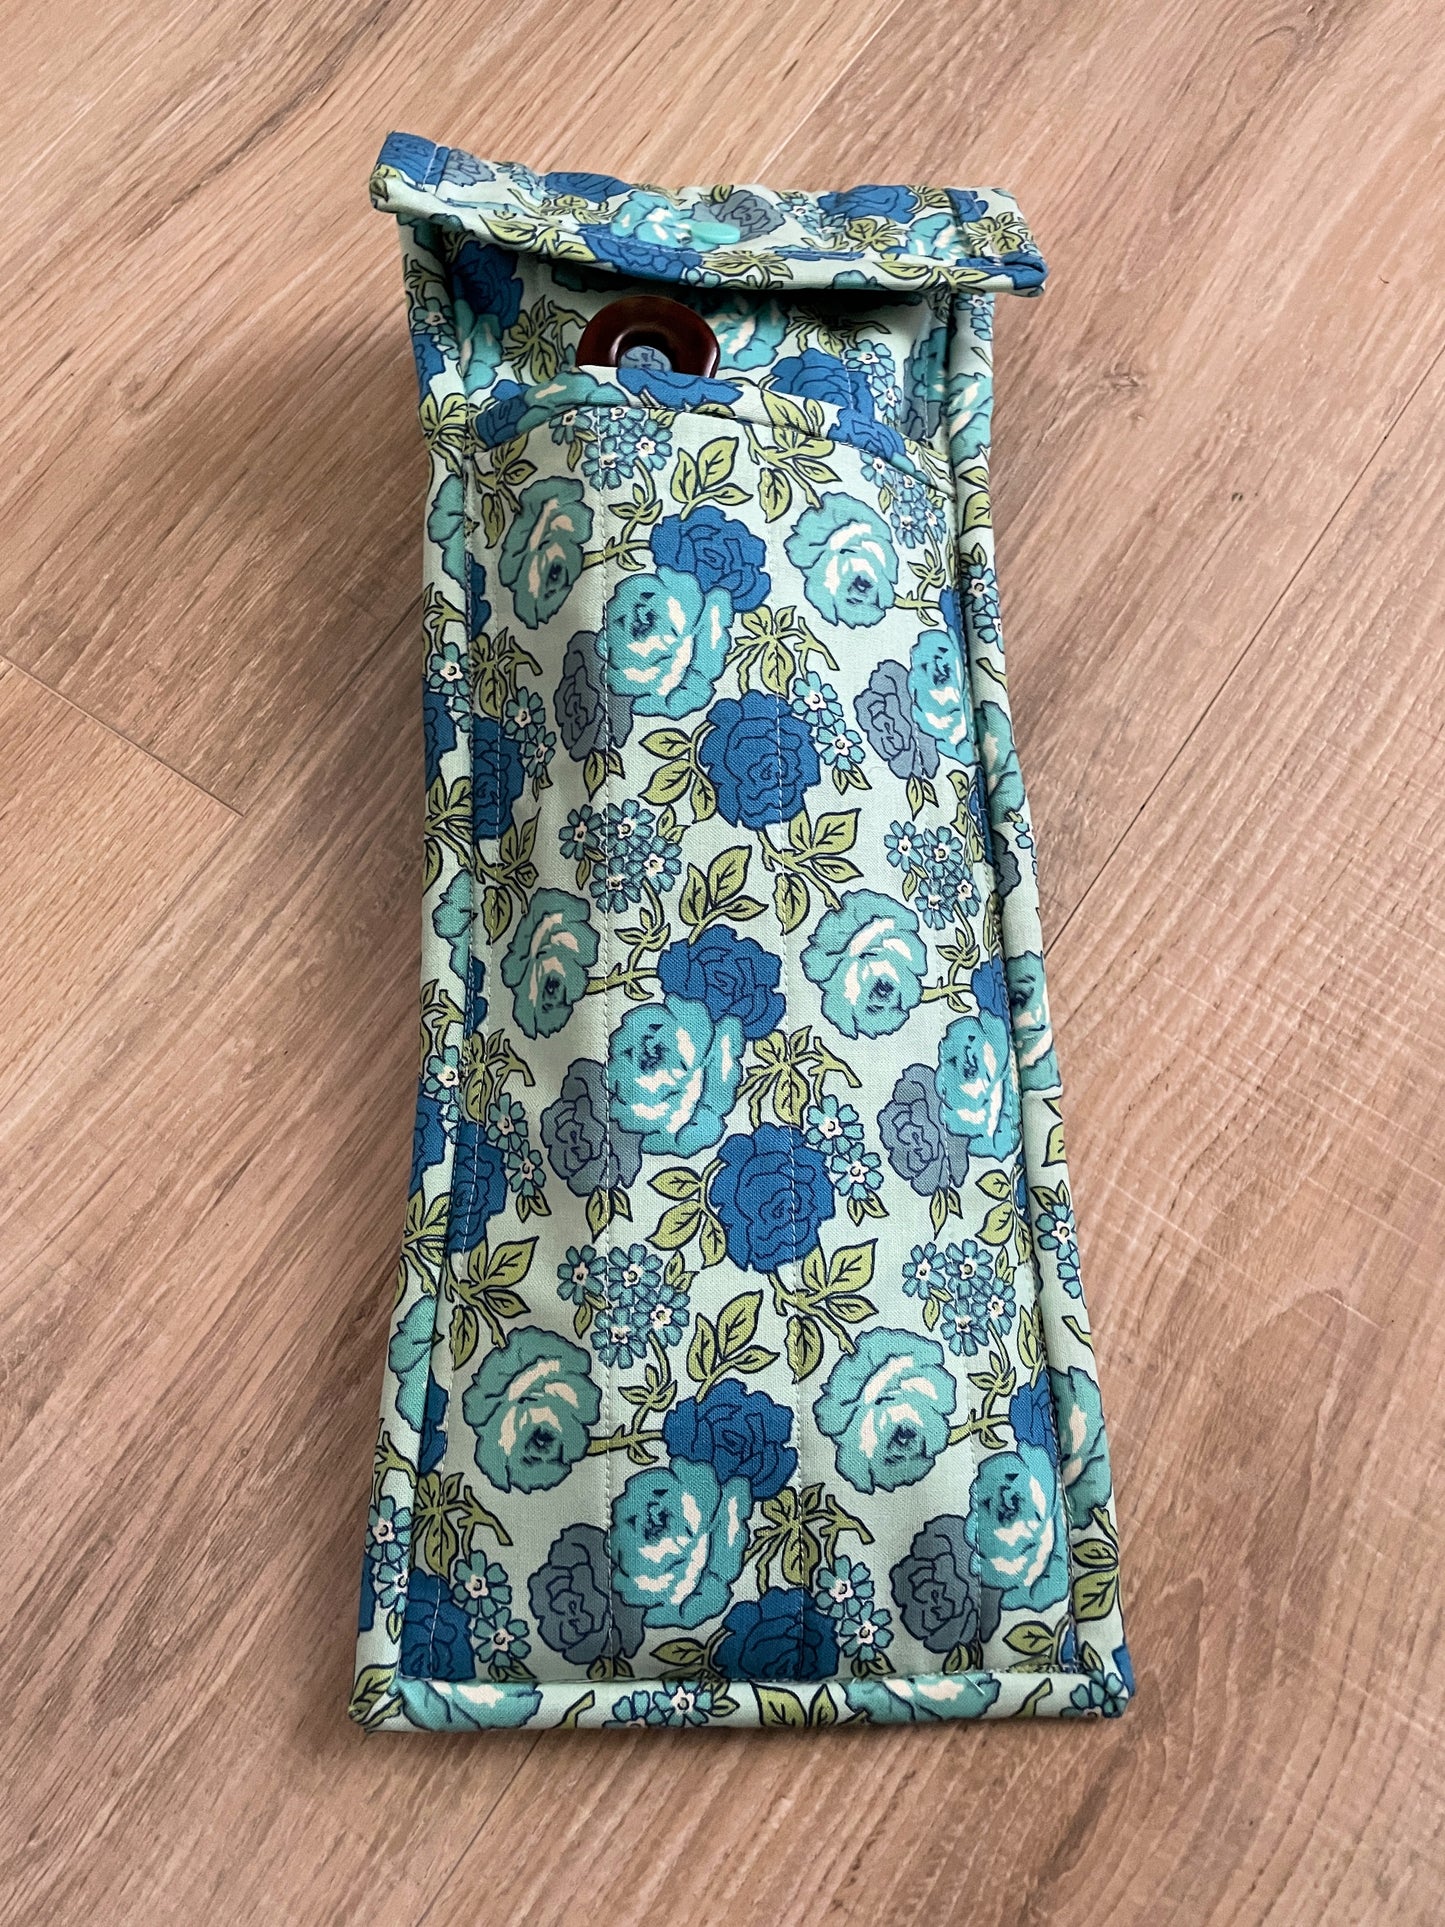 Handmade Quilted Flat Iron Bag, Heat Resistant Curling Iron Case